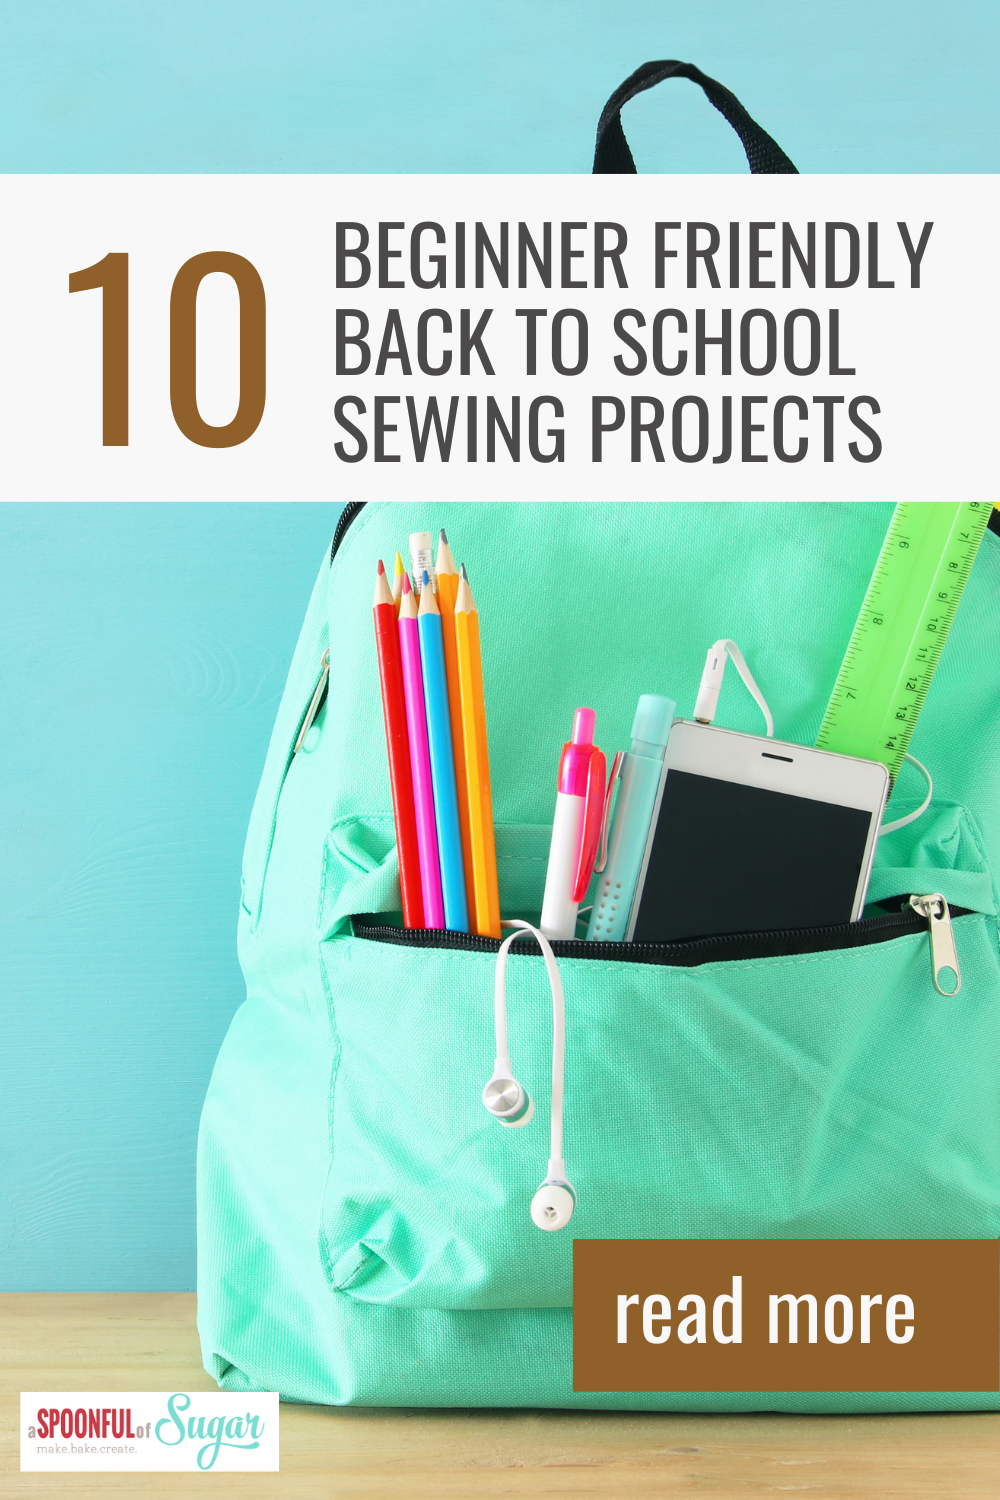 10 Beginner Friendly Sewing Projects for Kids Going Back to School